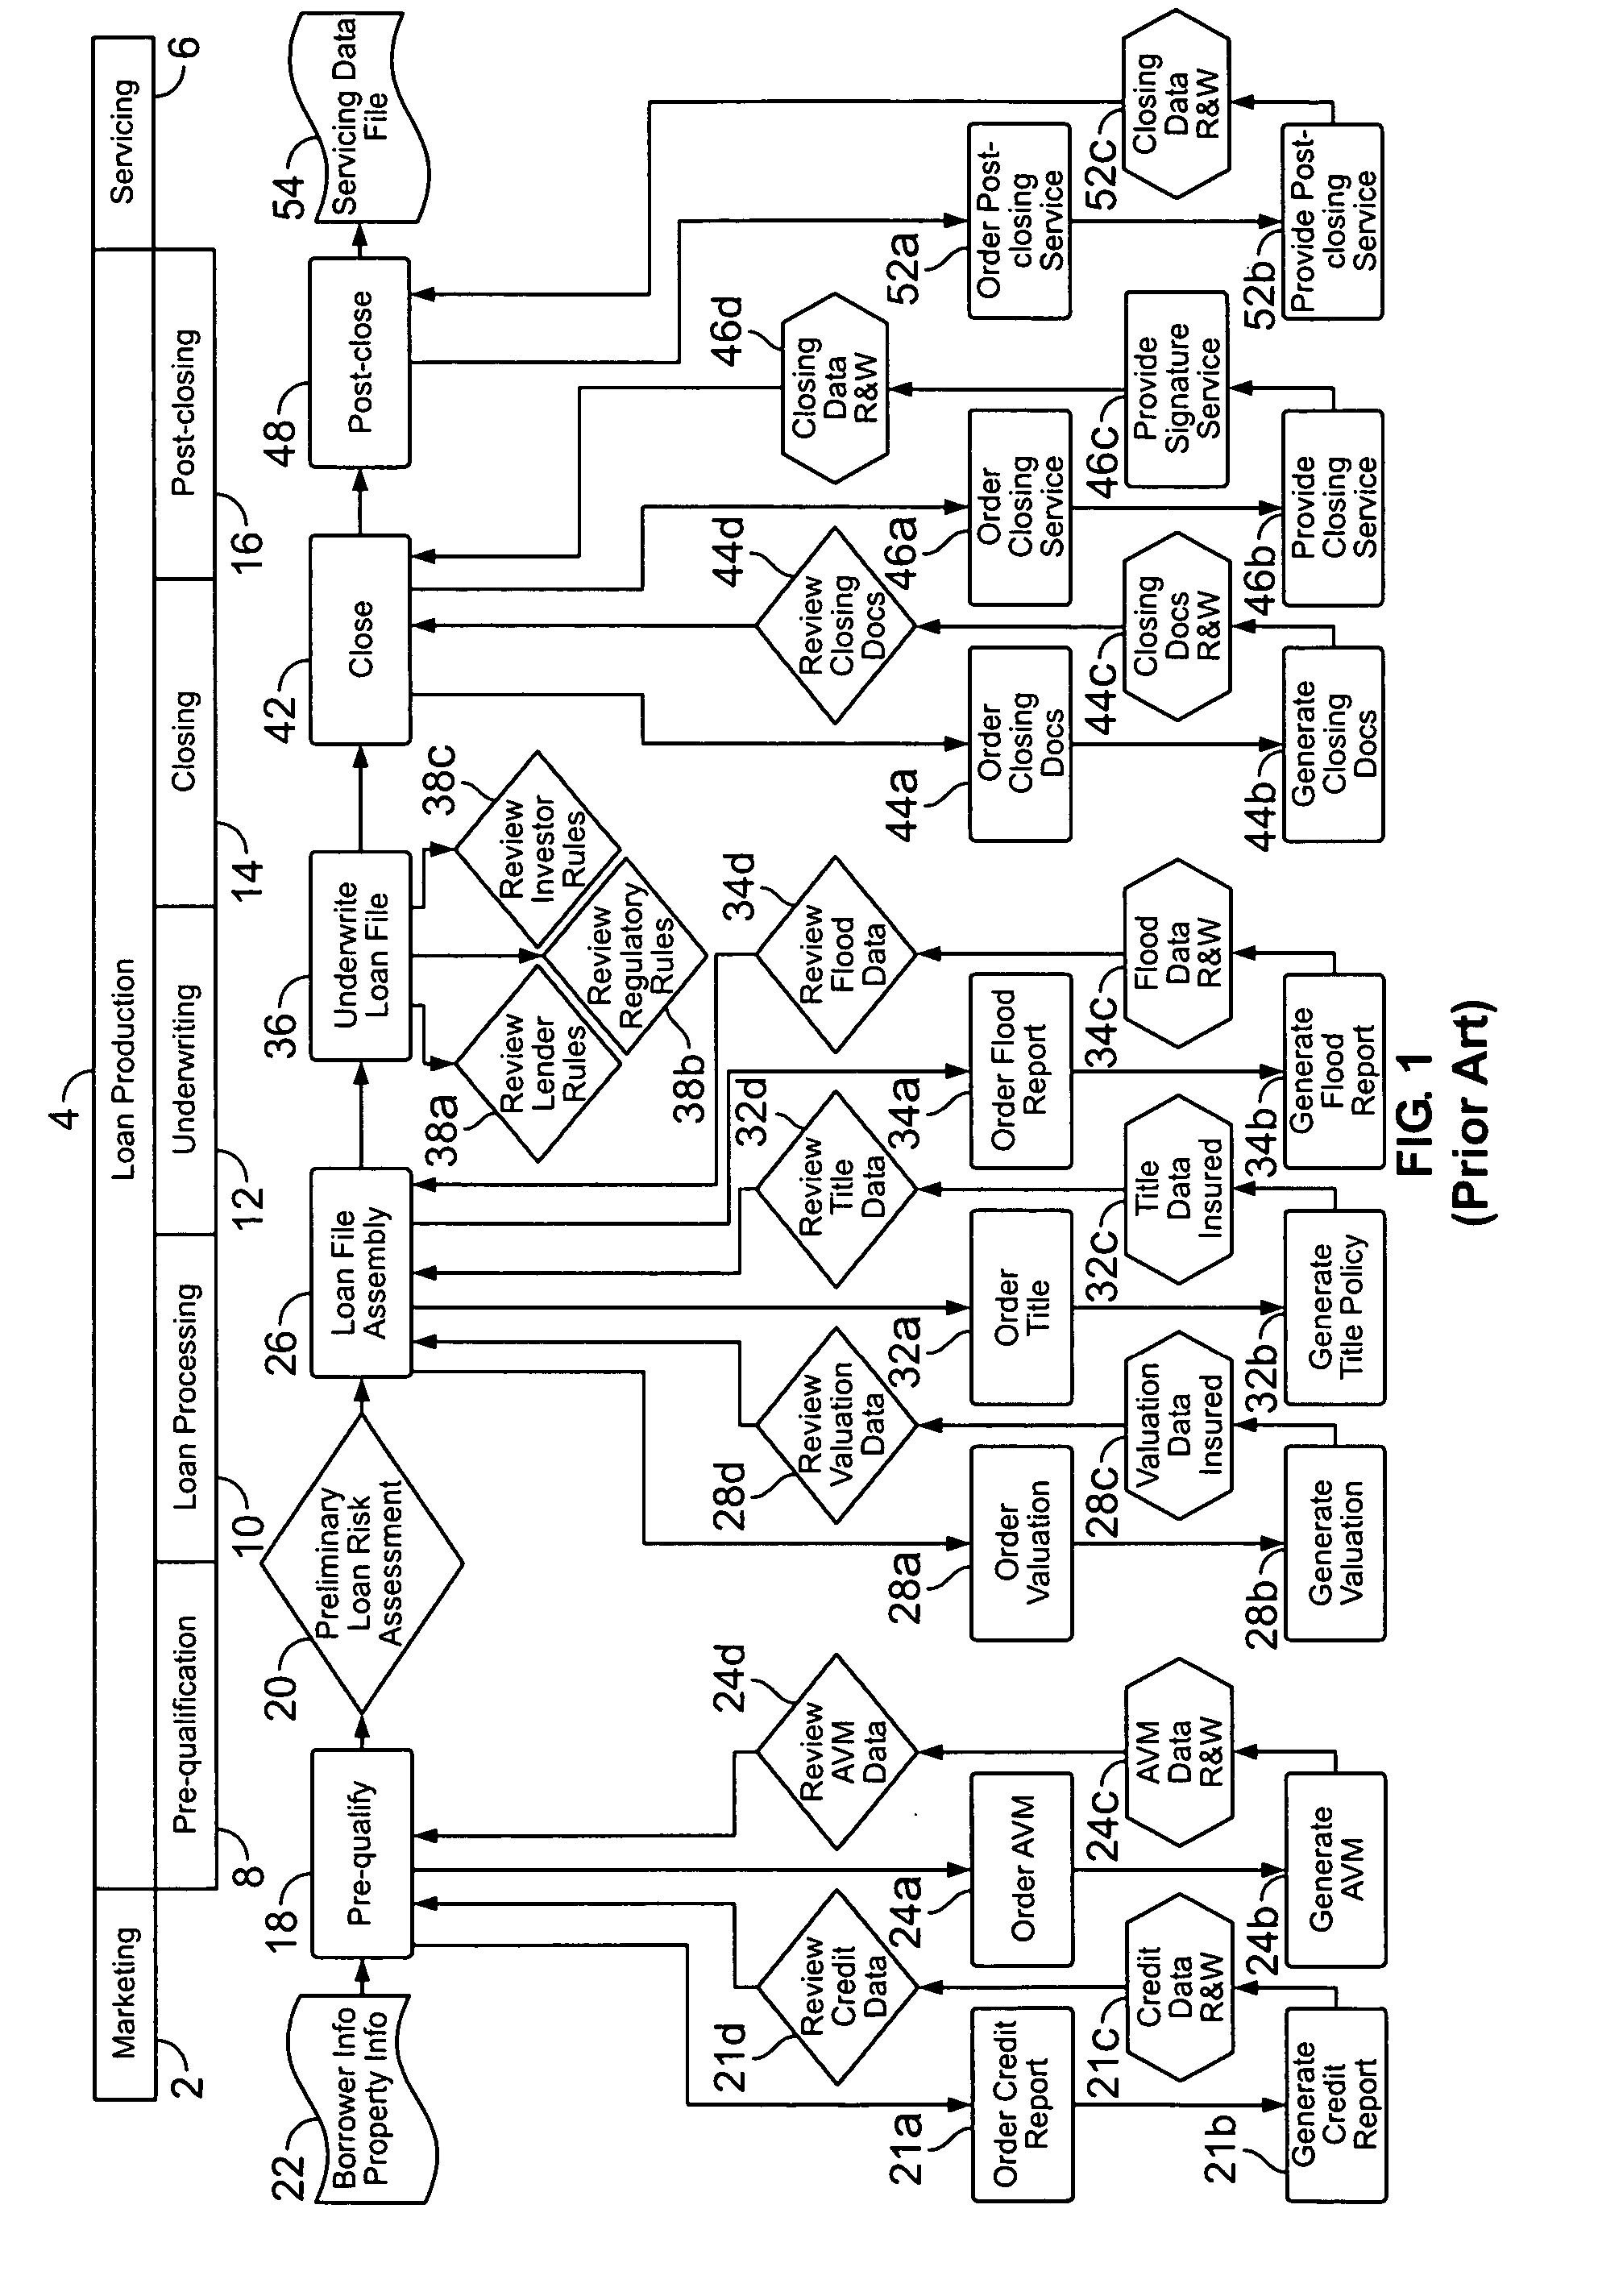 Product, system and method for certification of closing and mortgage loan fulfillment